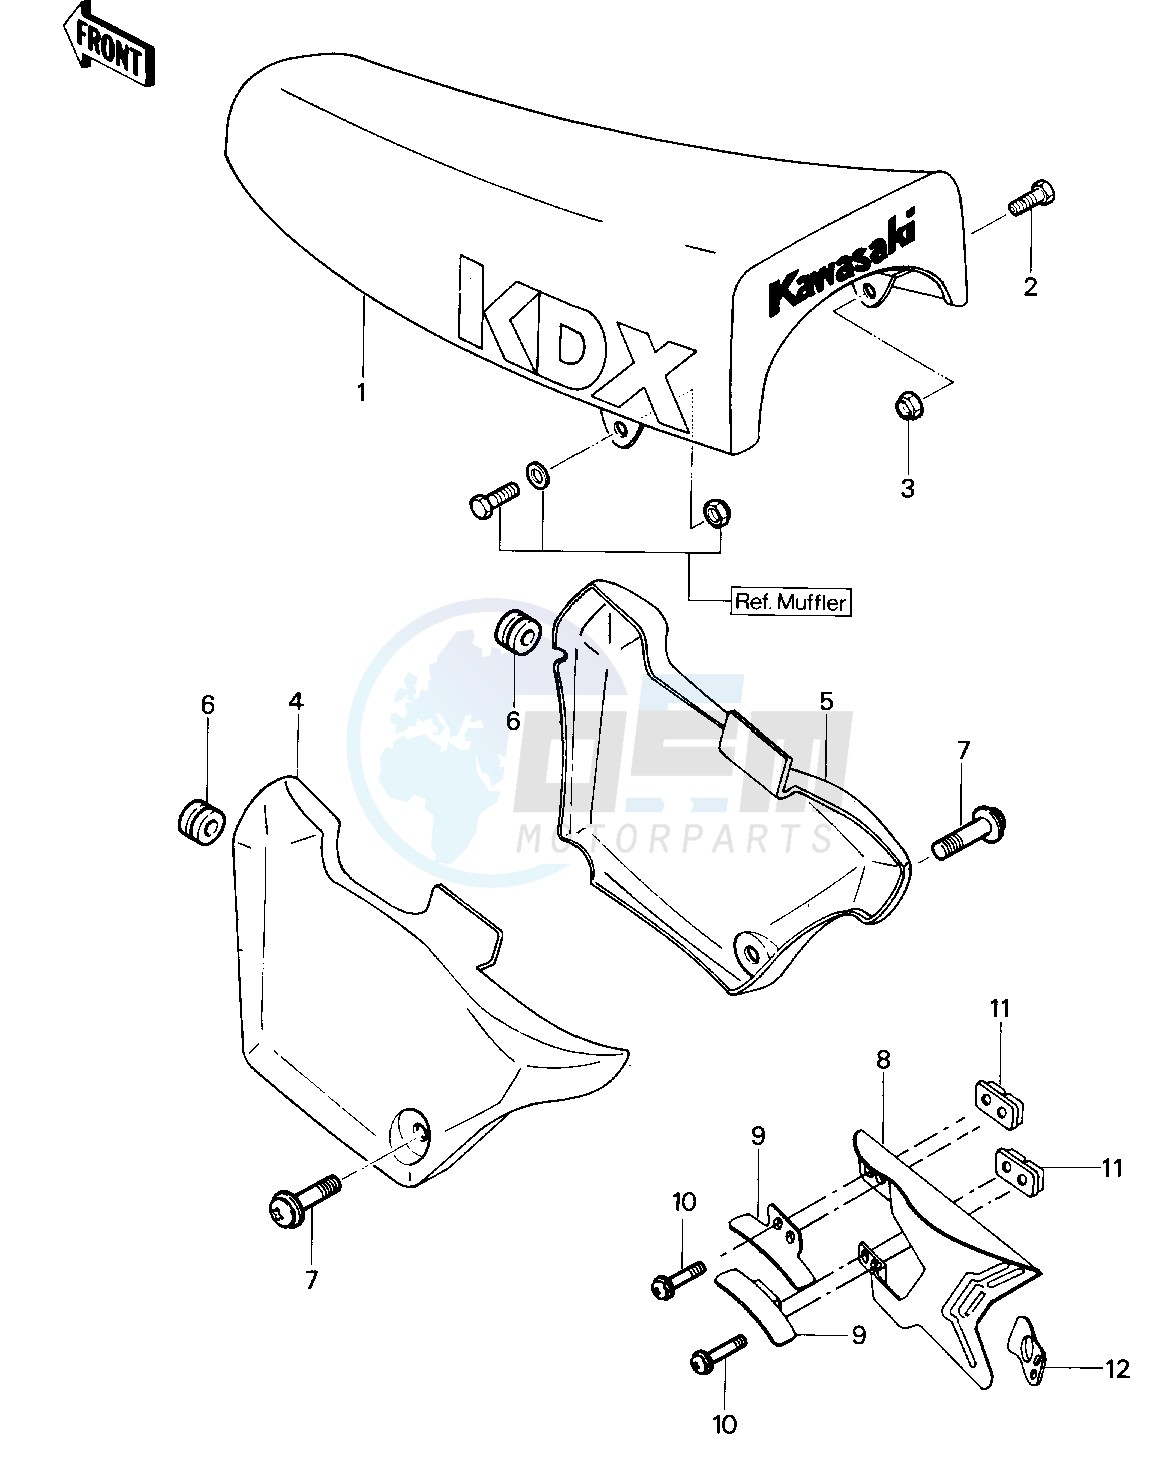 SEAT_SIDE COVERS_CHAIN COVER blueprint